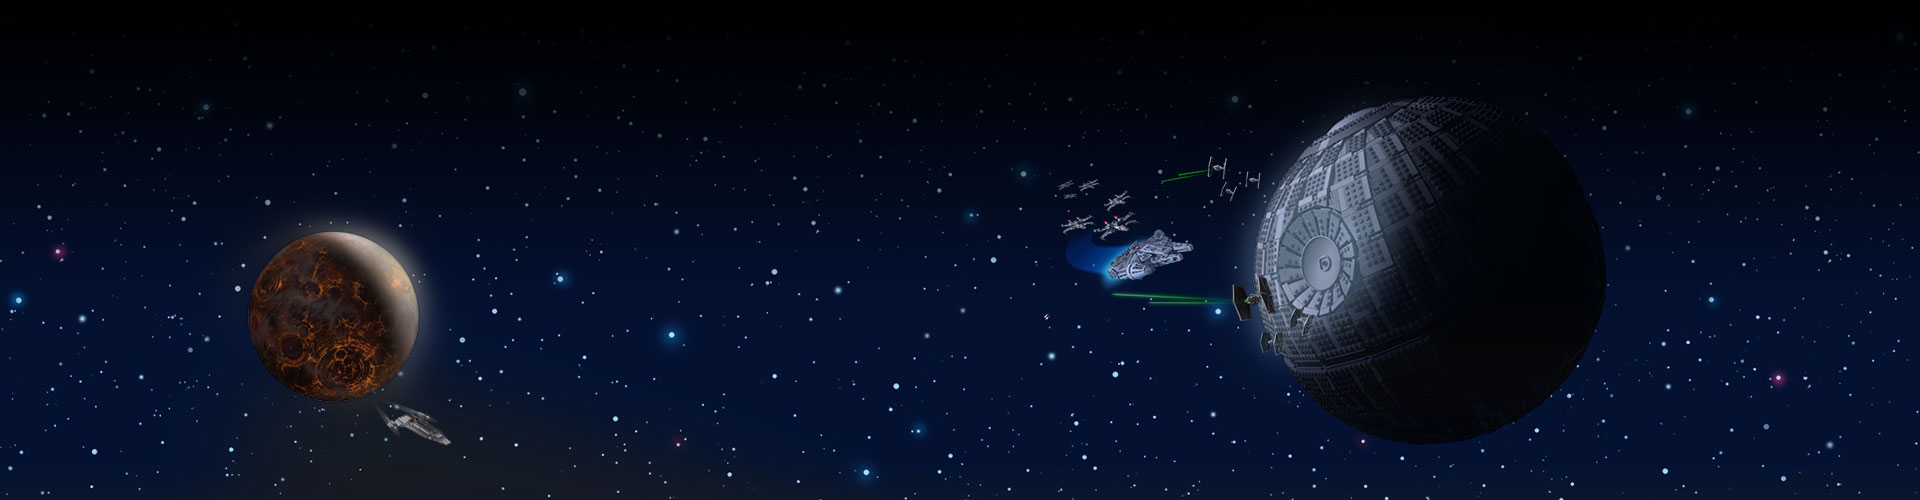 Two enemy bases in space with stars in the background.